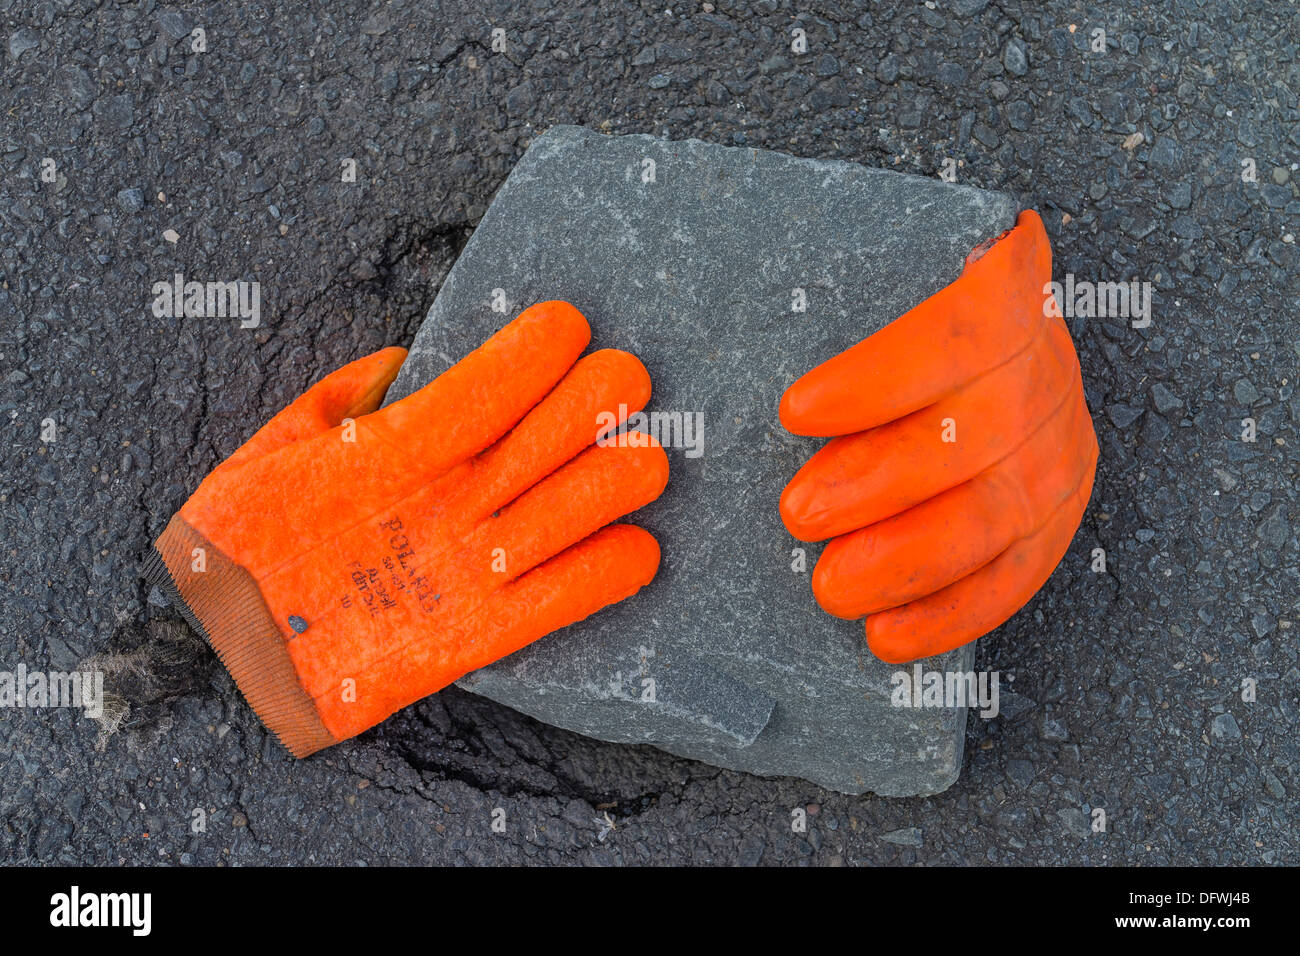 A pair of bright fluorescent orange worker's gloves lay over a gray stone paver on the street in Peggys Cove, Nova Scotia. Stock Photo